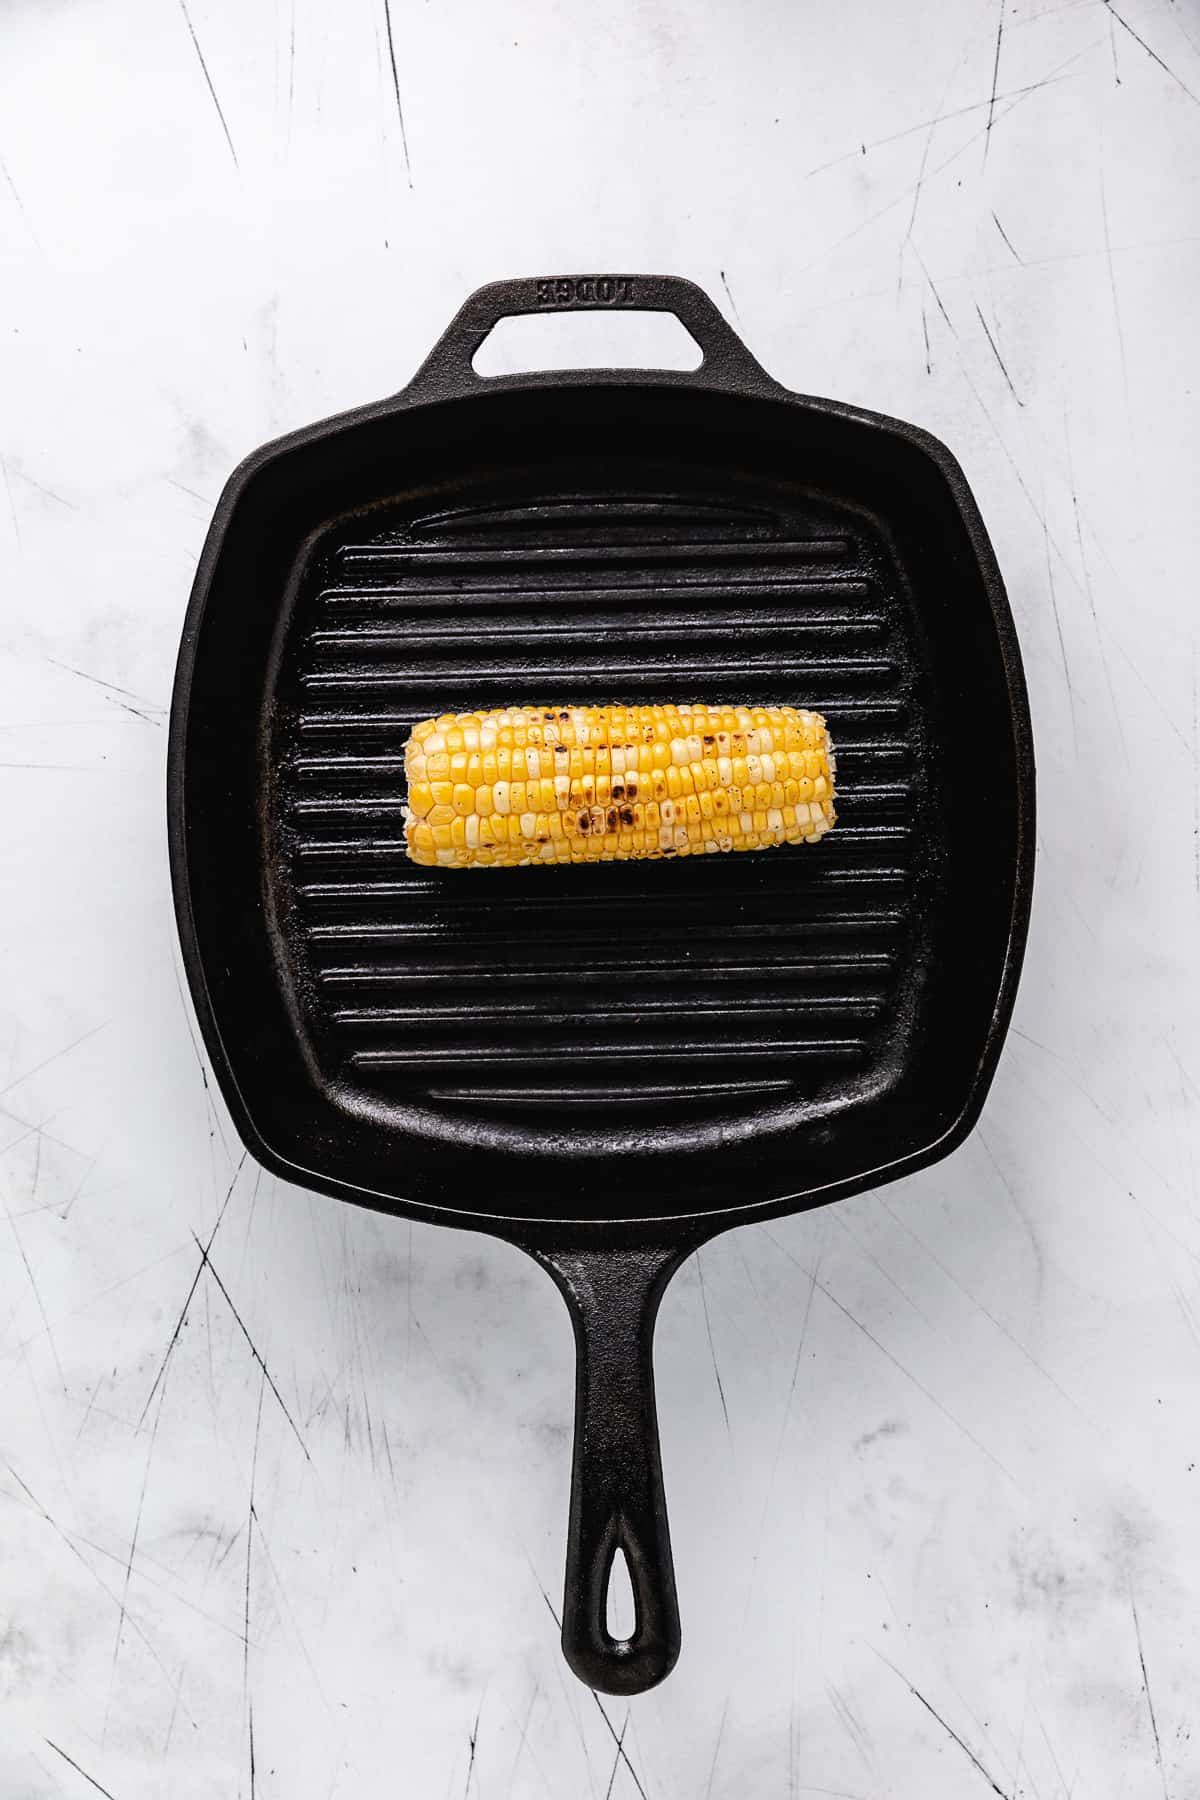 Ear of corn on a griddle pan.